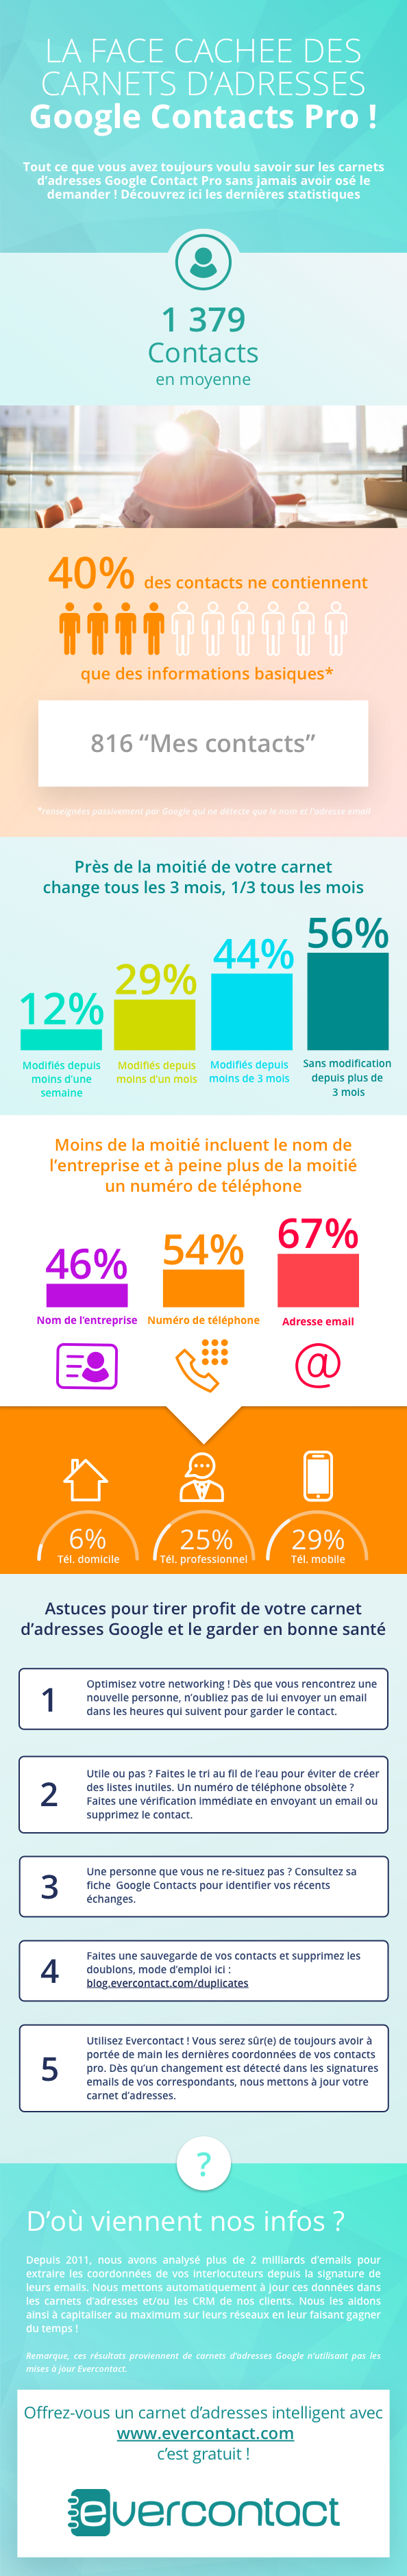 evercontact-infographie-la-face-cachee-des-carnets-dadresses-google-contacts-pro